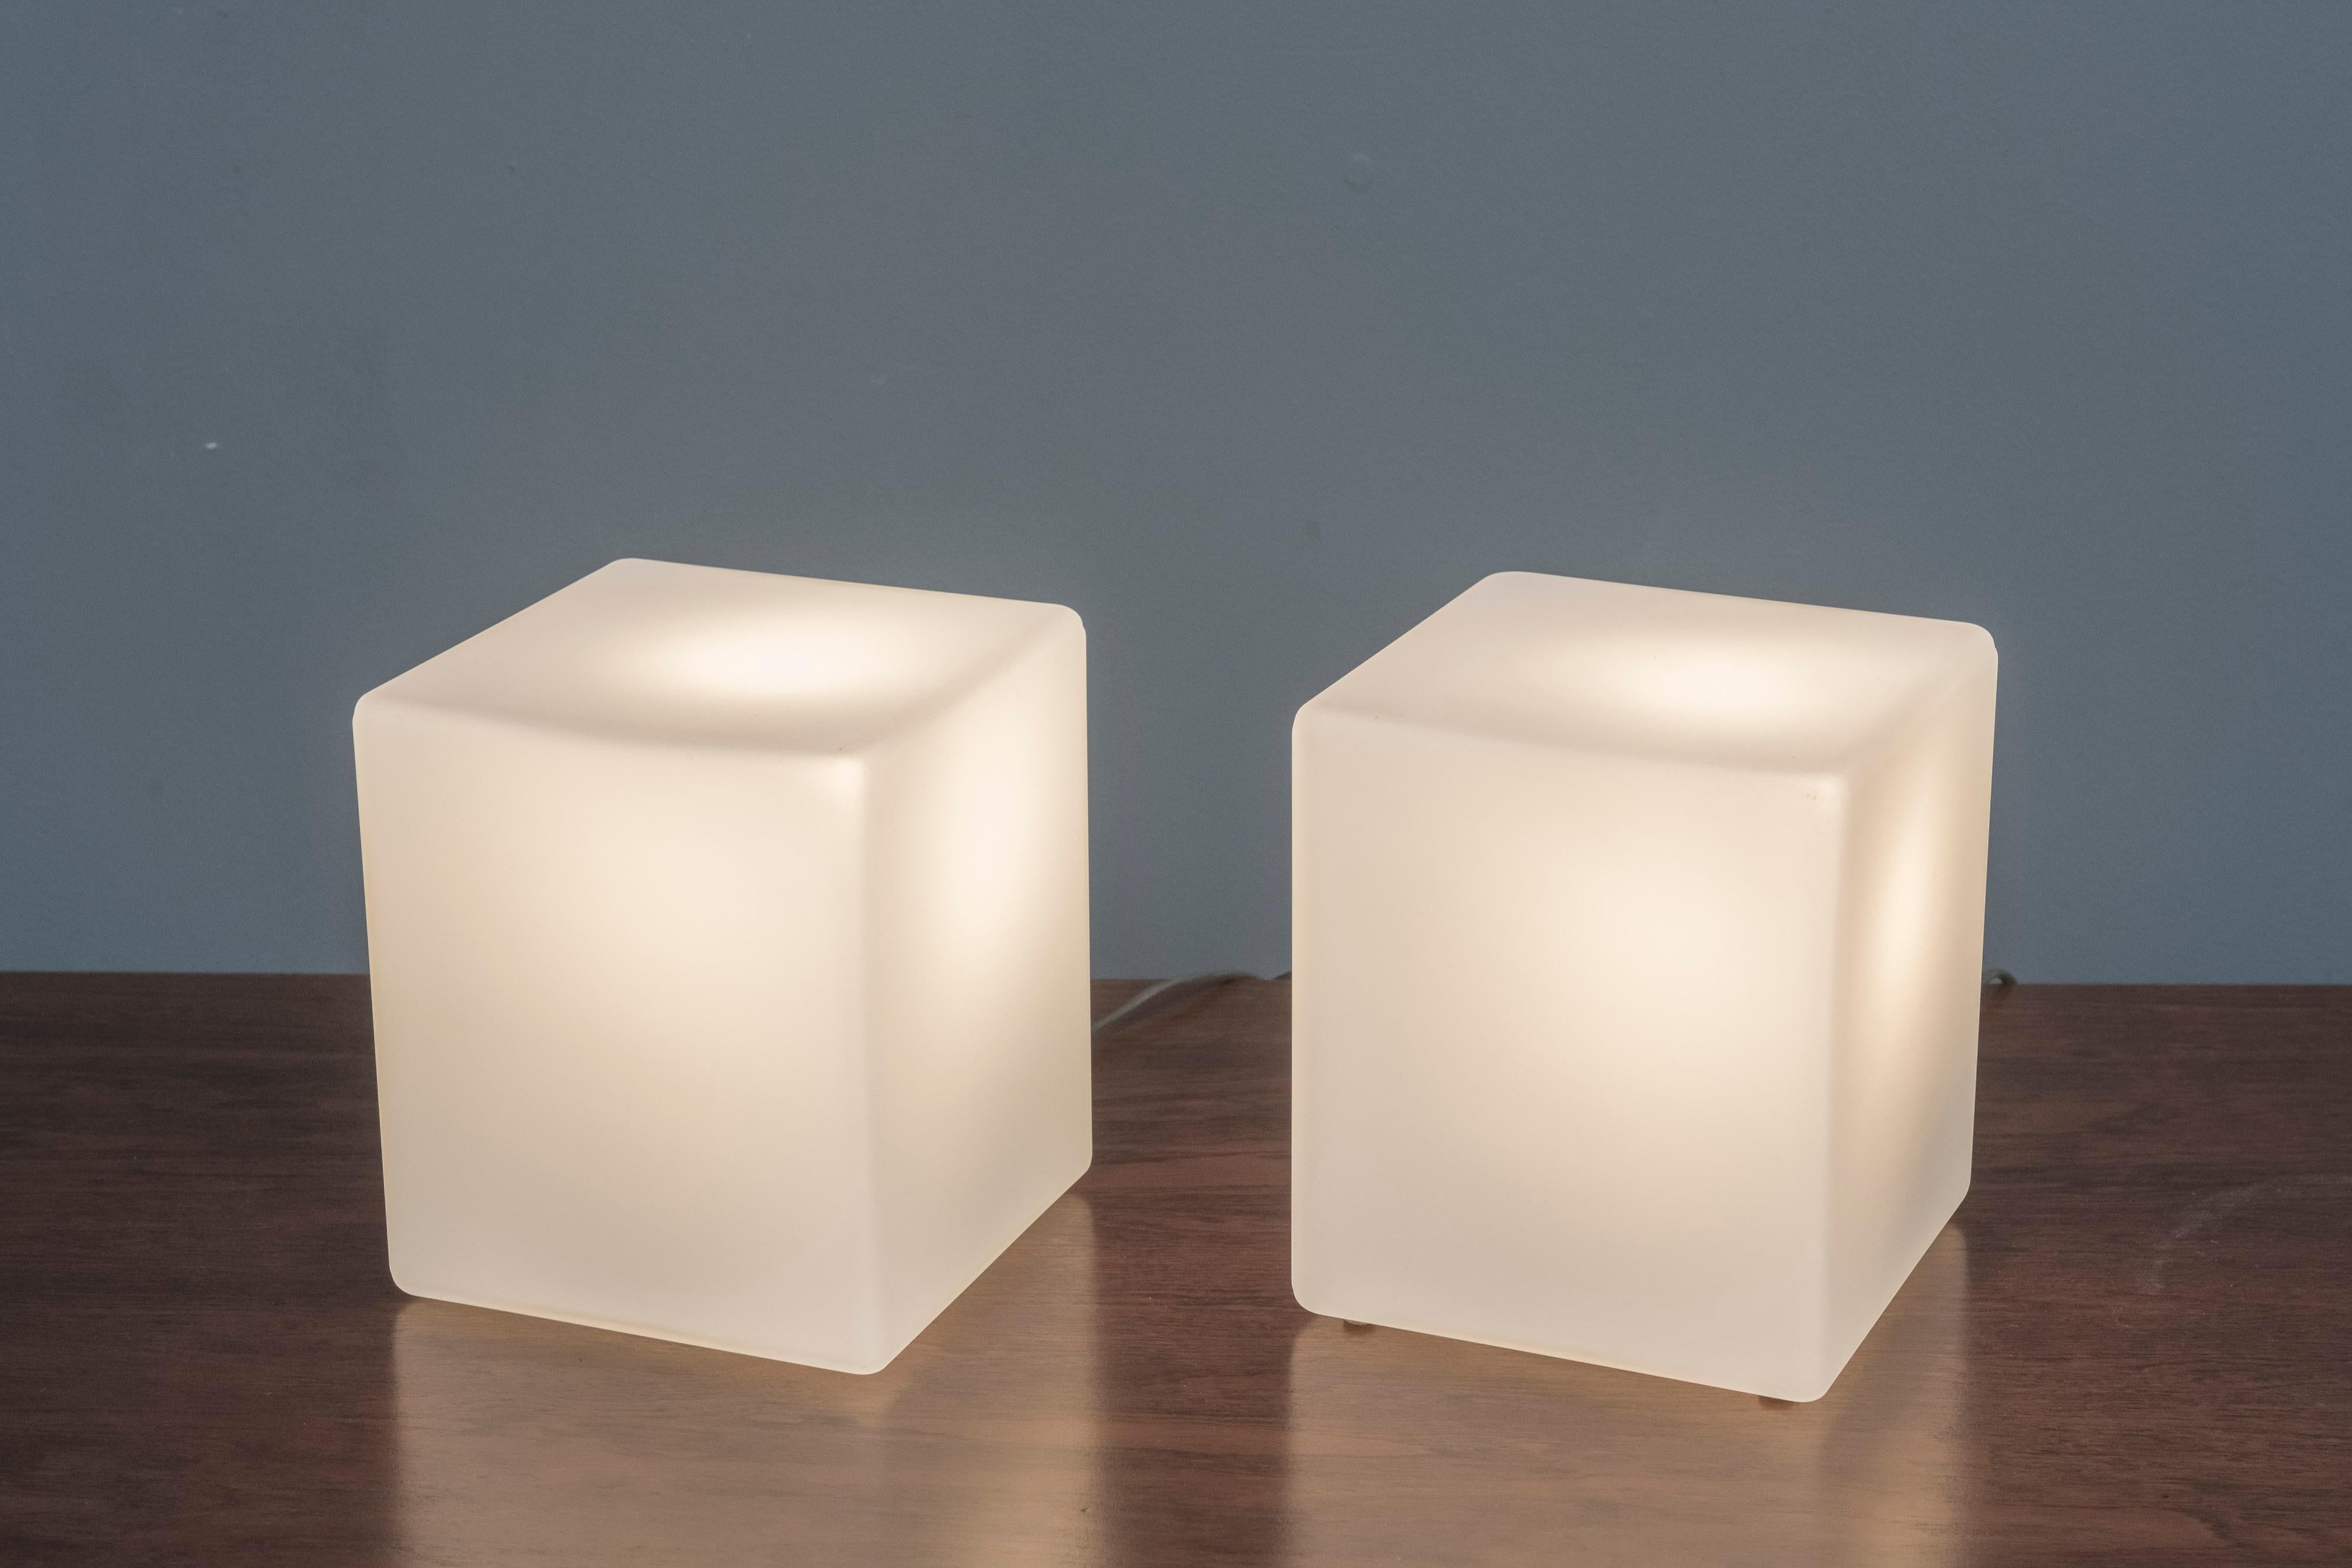 Pair of frosted glass cube form table lamps by Laurel Lamp Company, labeled.